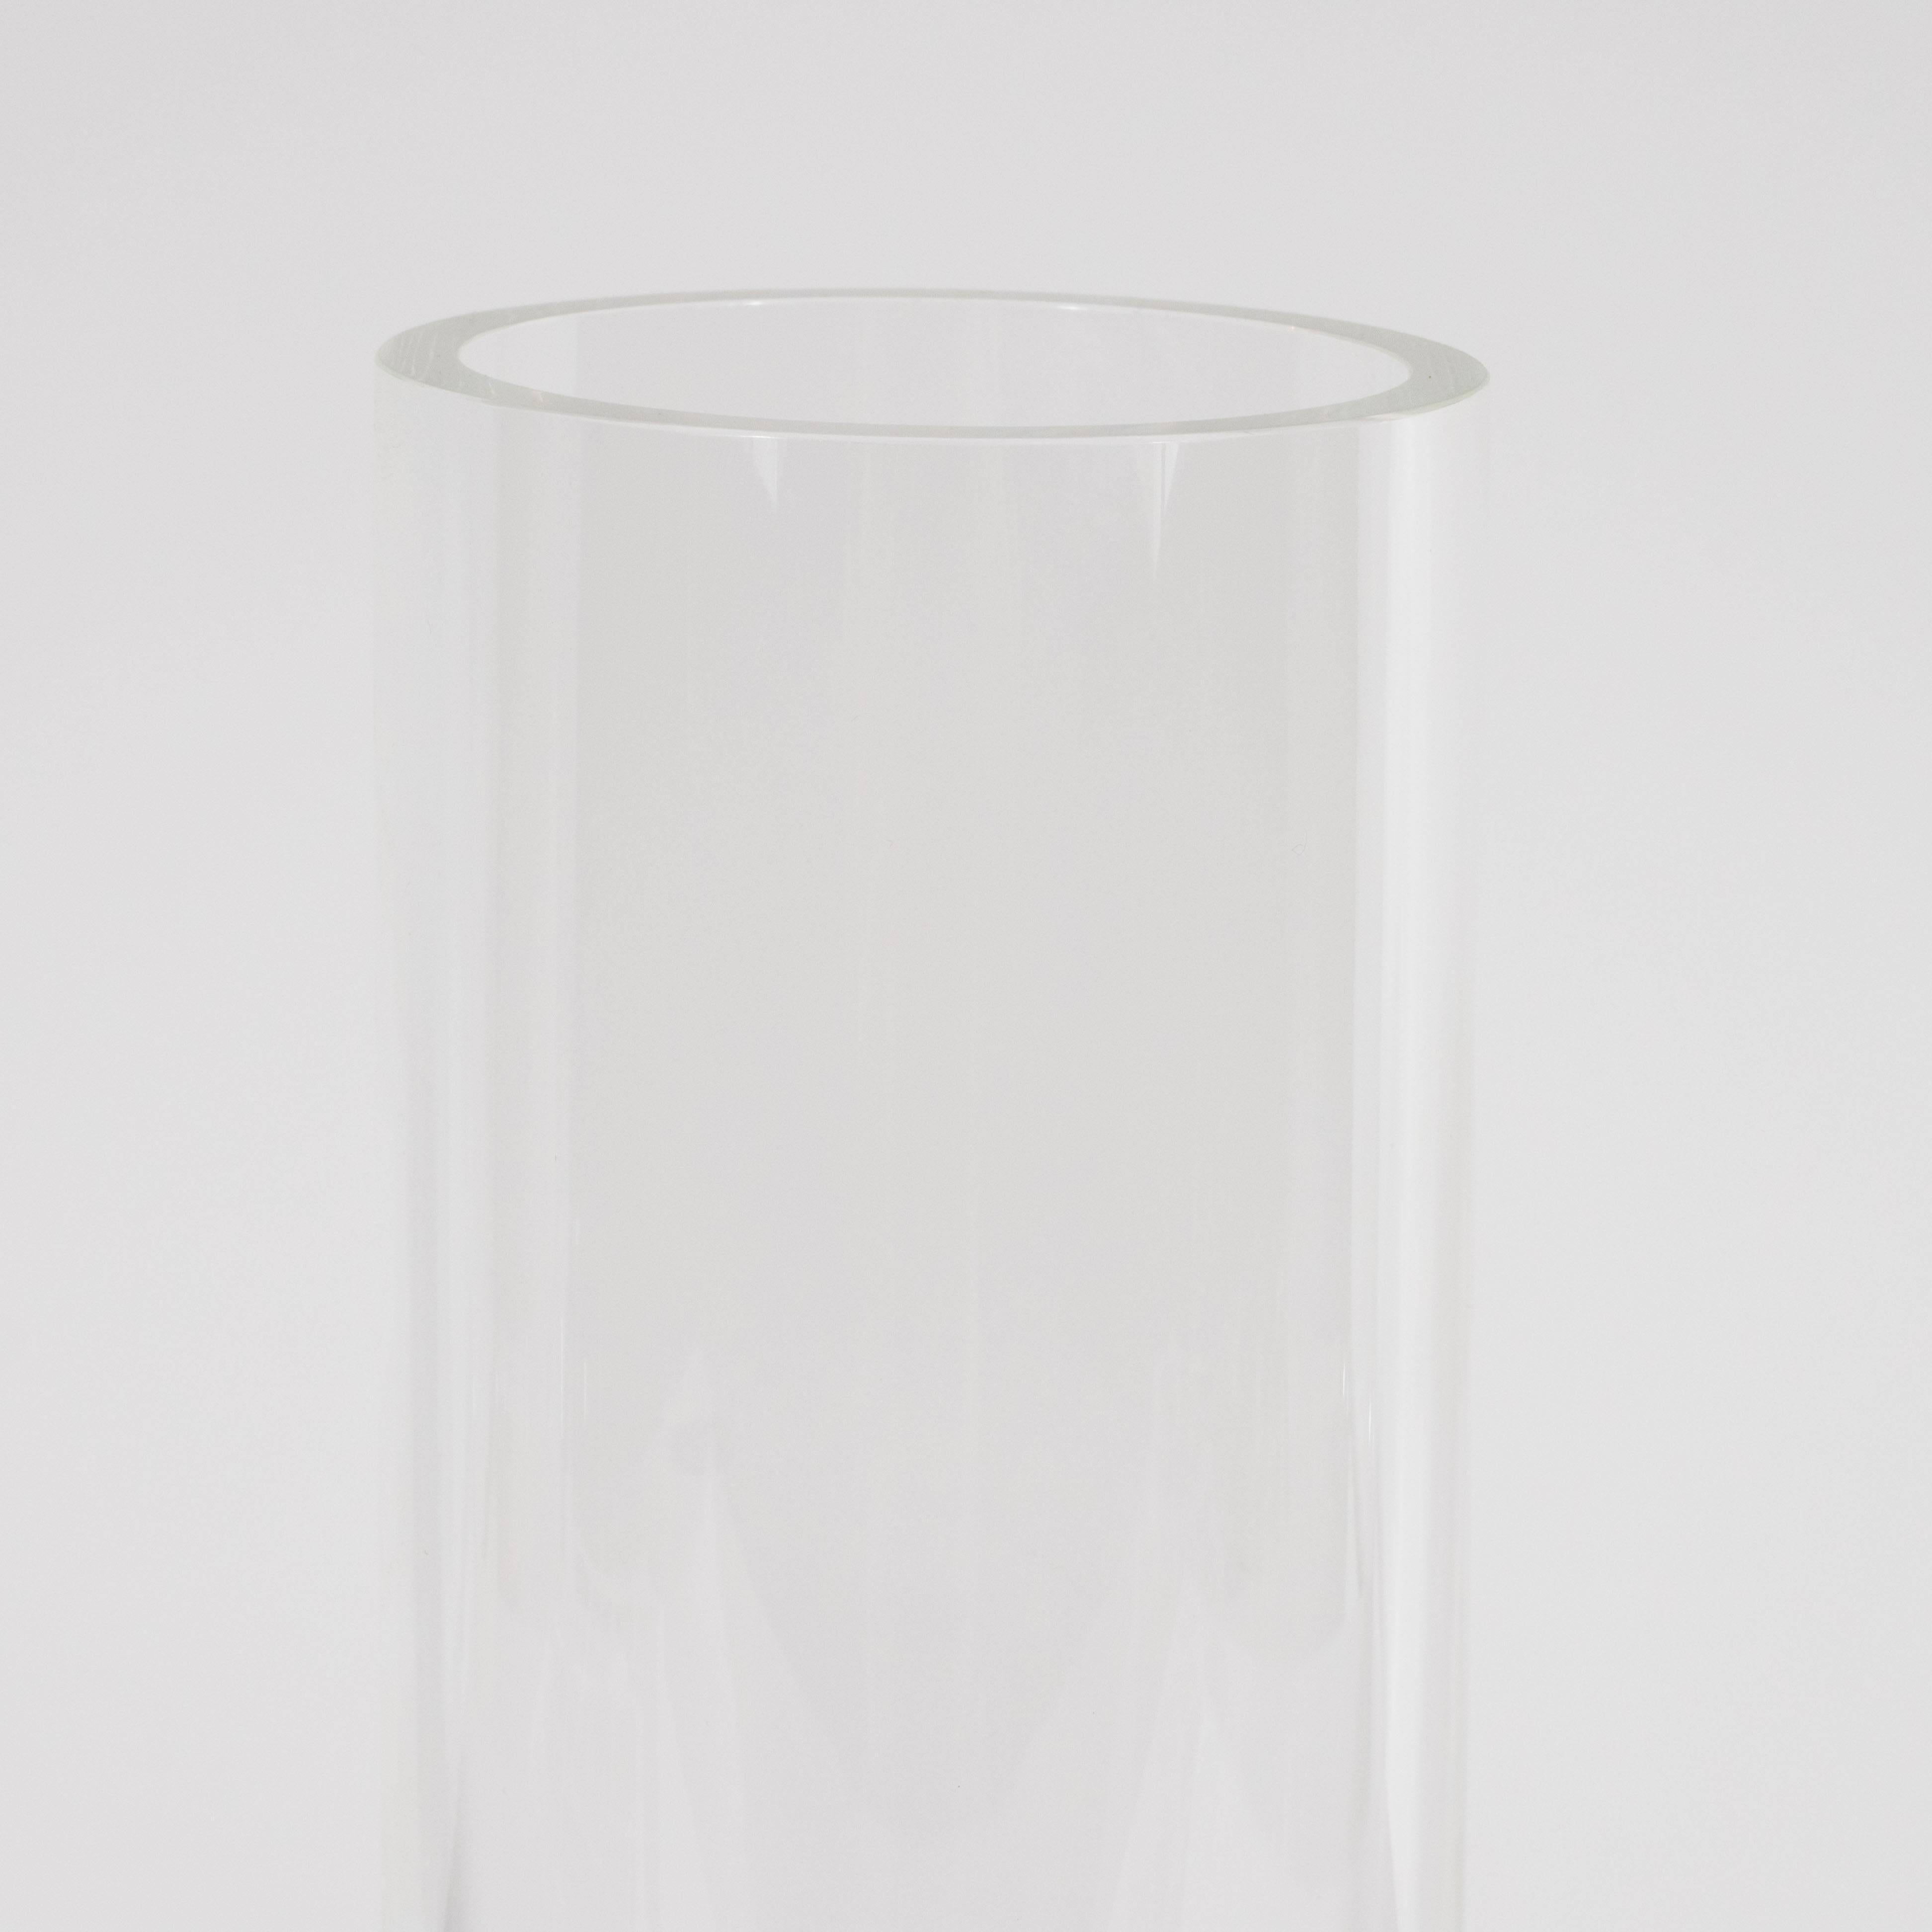 Blown Glass Mid-Century Modern Cylindrical Glass Vase with Bubble Detail by Steuben